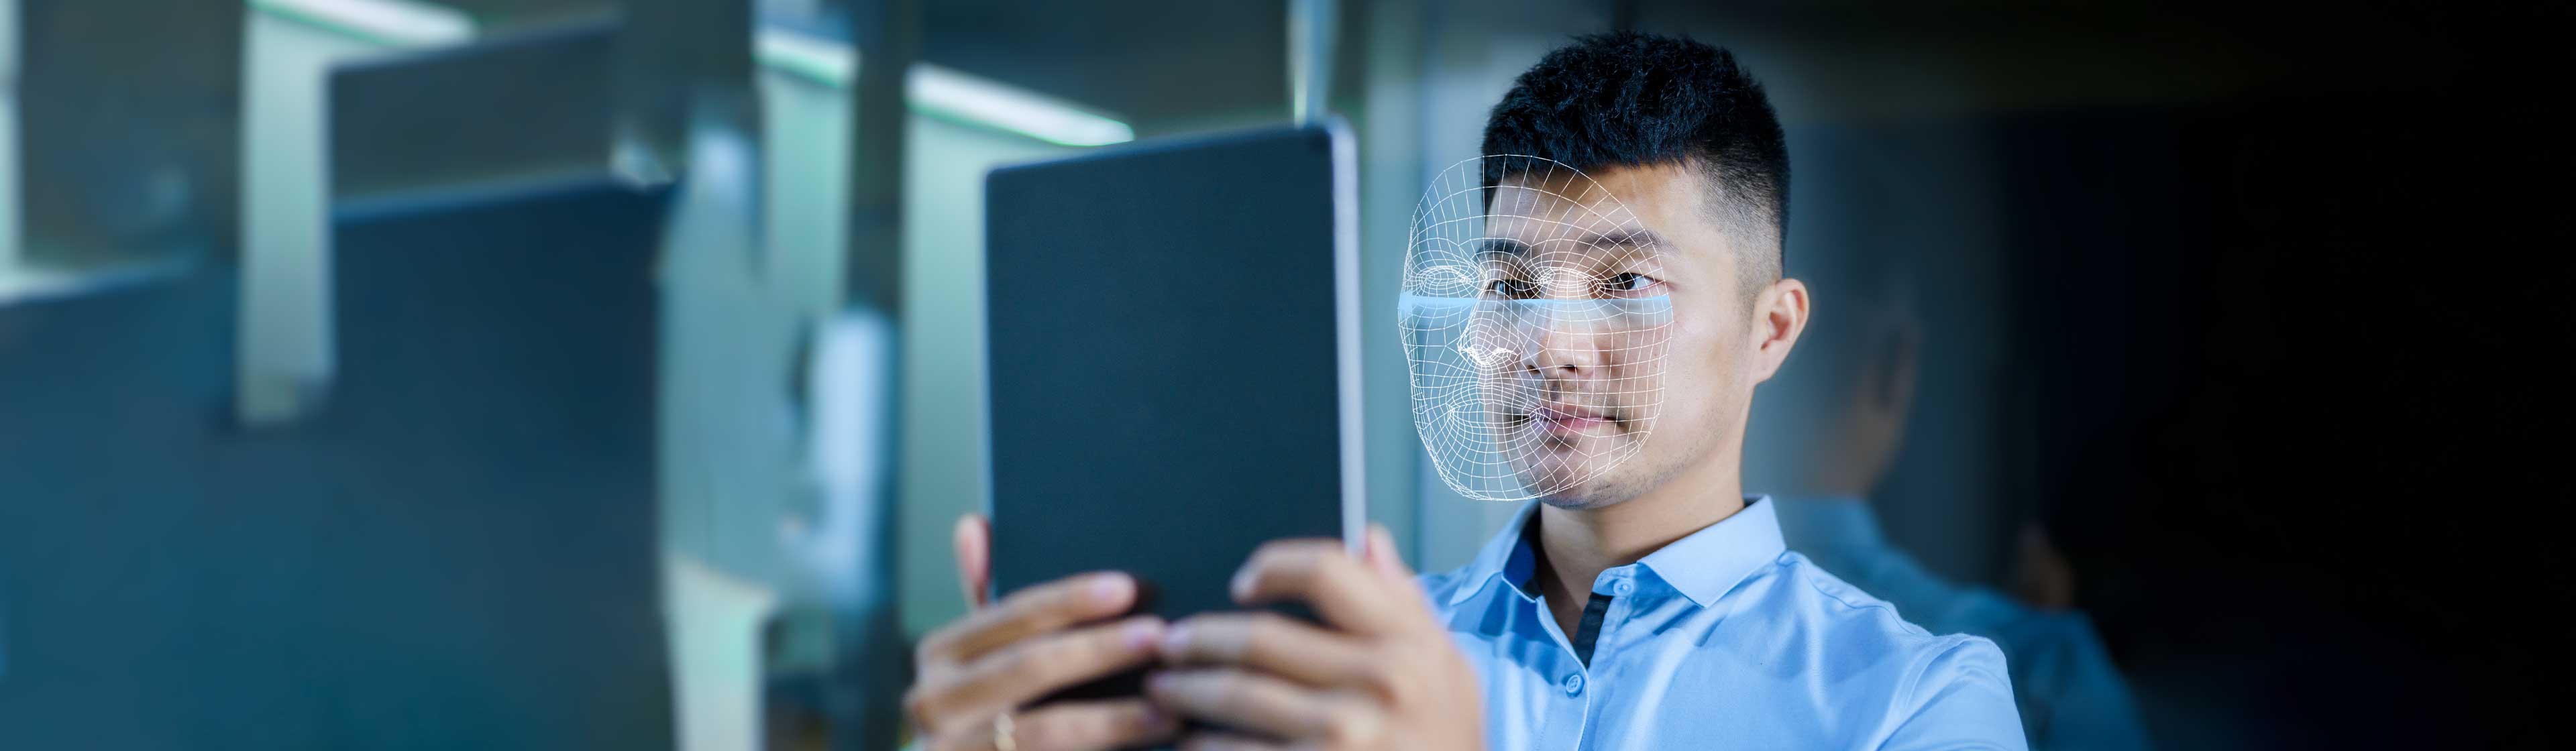 A man using AI for facial scanning on a tablet